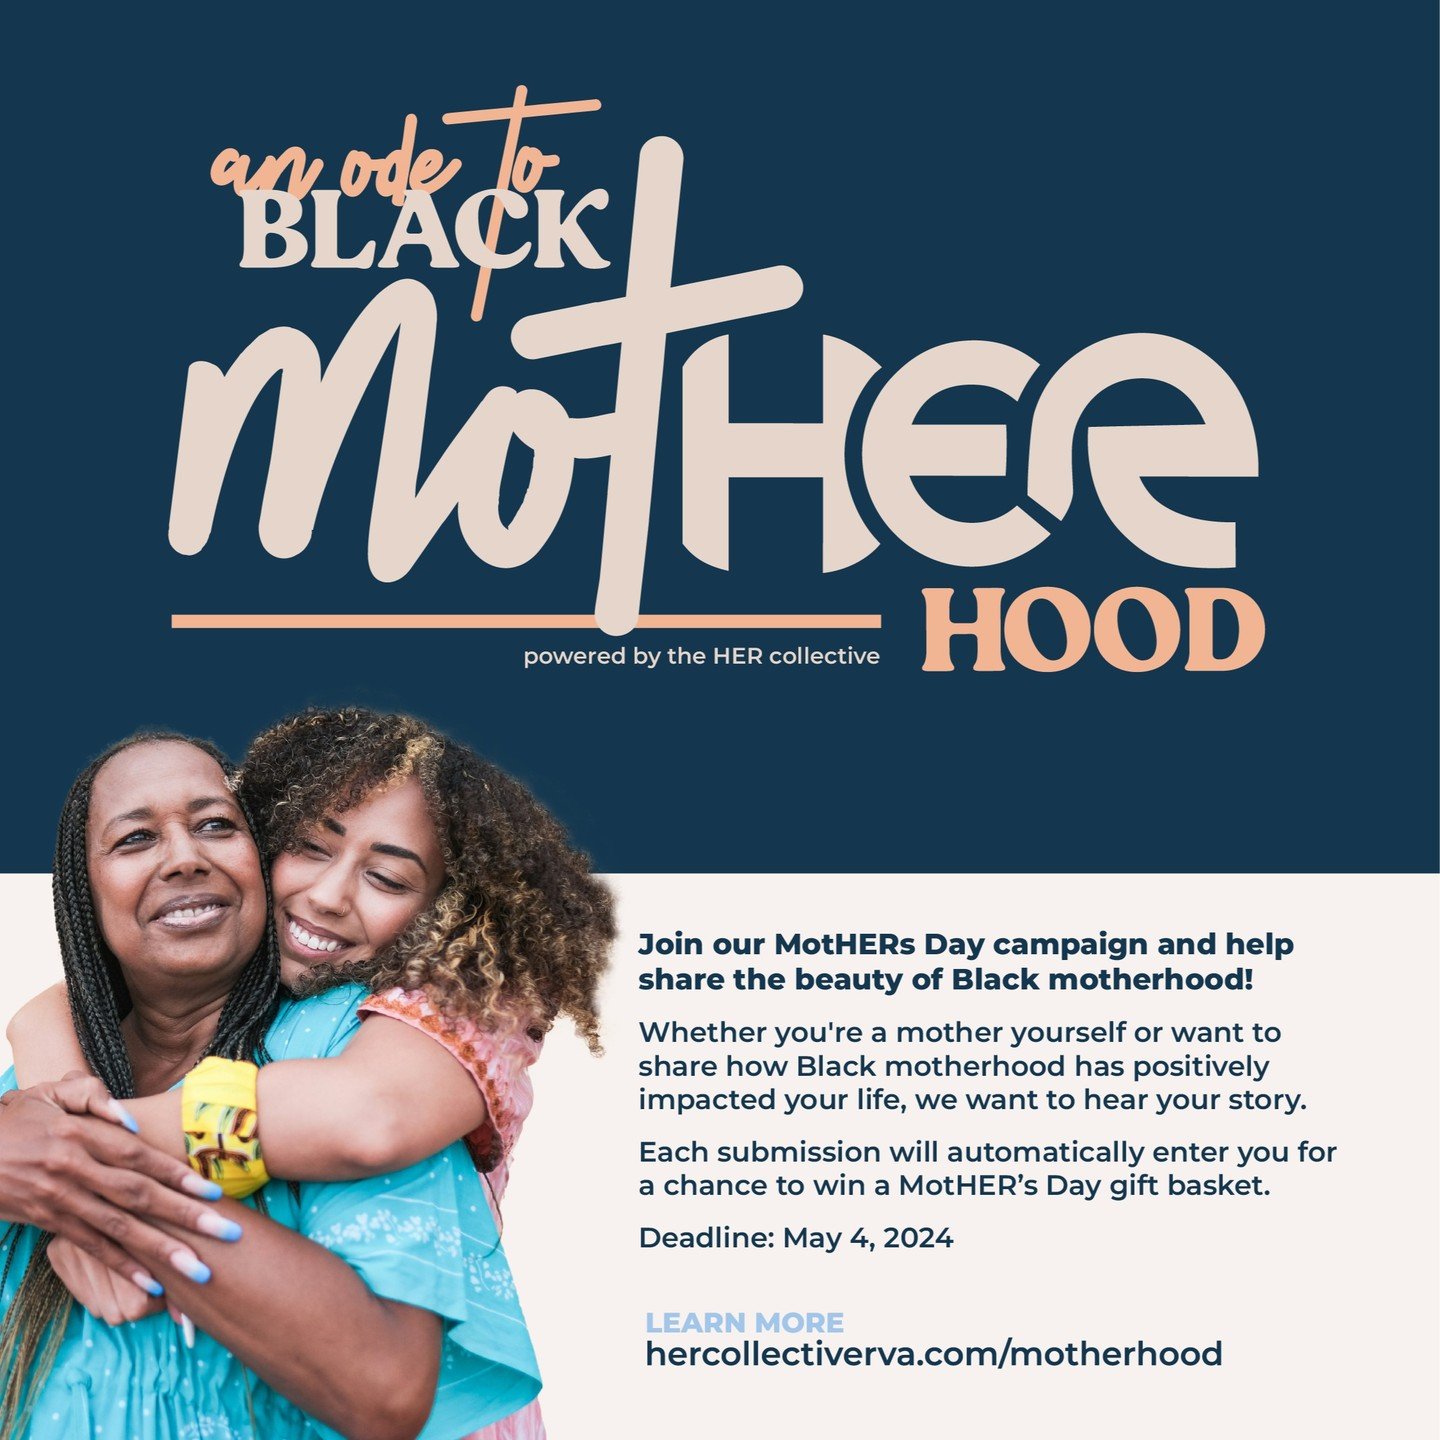 This Mother's Day, we're spotlighting the incredible strength, resilience, and love of Black motHERs everywhere. 💙

We invite you to be part of our special digital campaign, where we'll share stories, experiences, and reflections highlighting the un